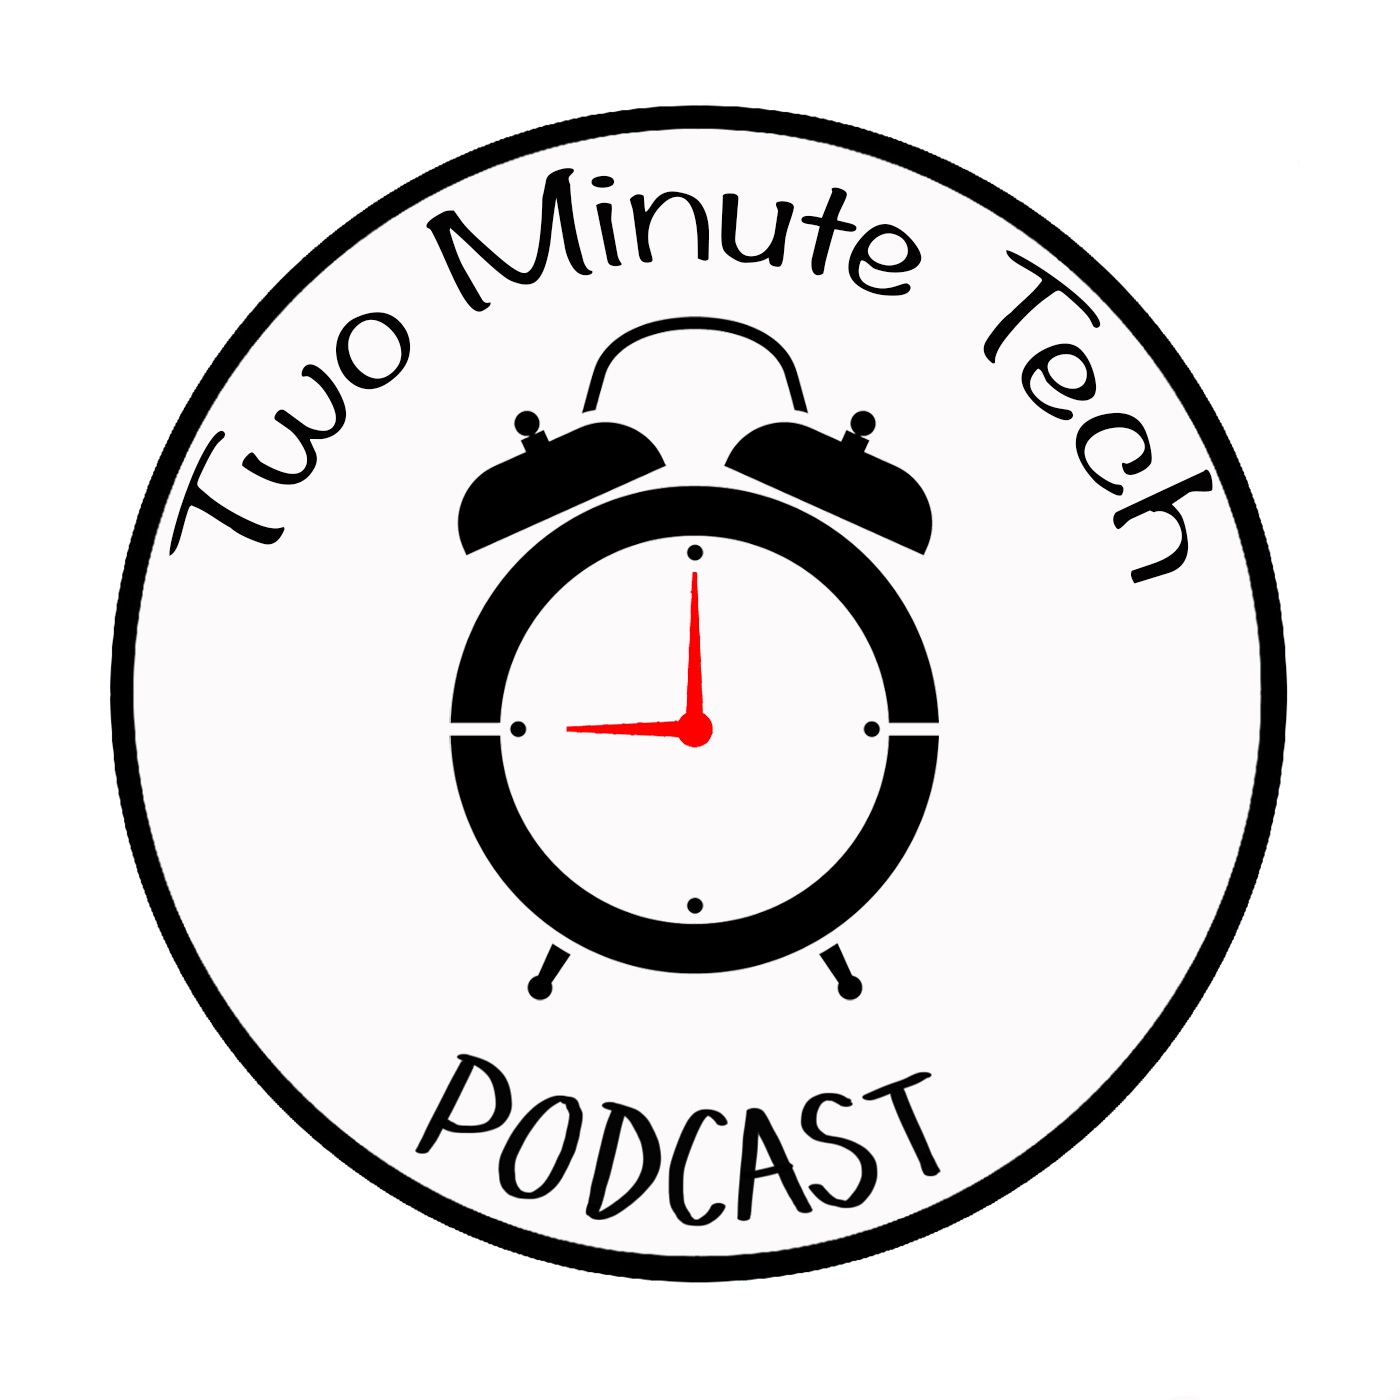 Episode 135 - More Apple Watch settings